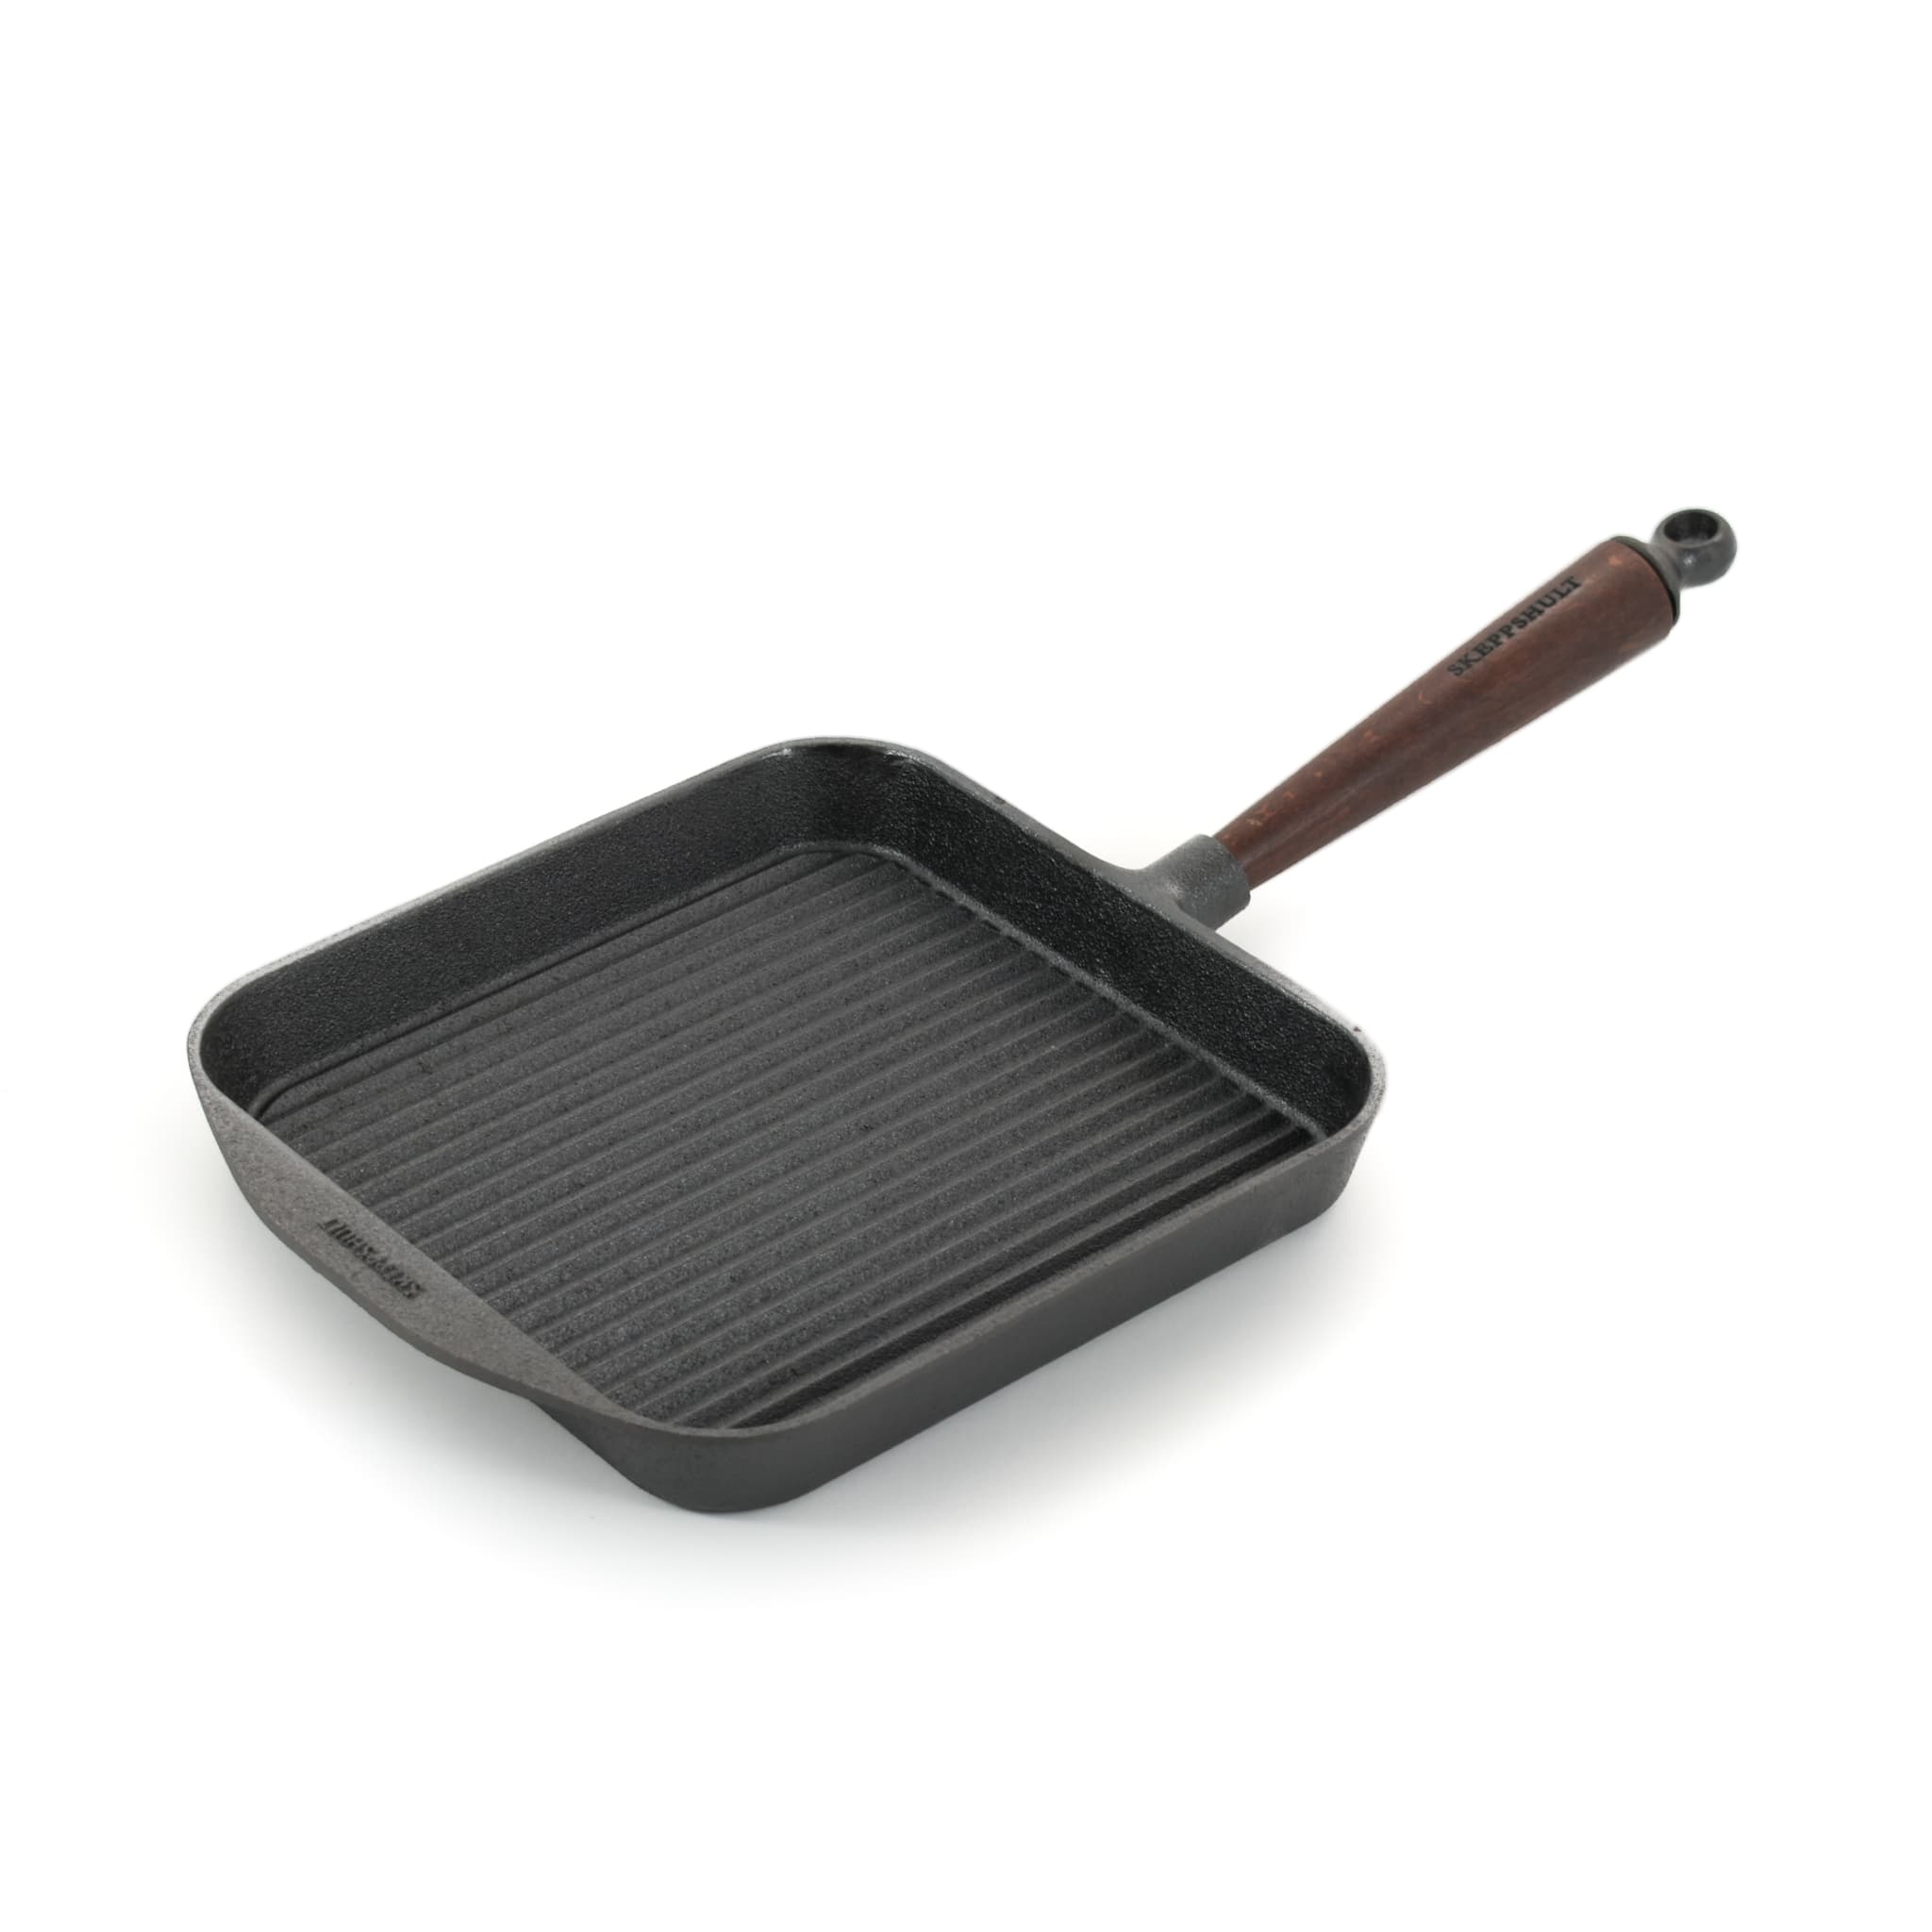 Skeppshult Traditional Cast Iron Square Grill Pan 25cm